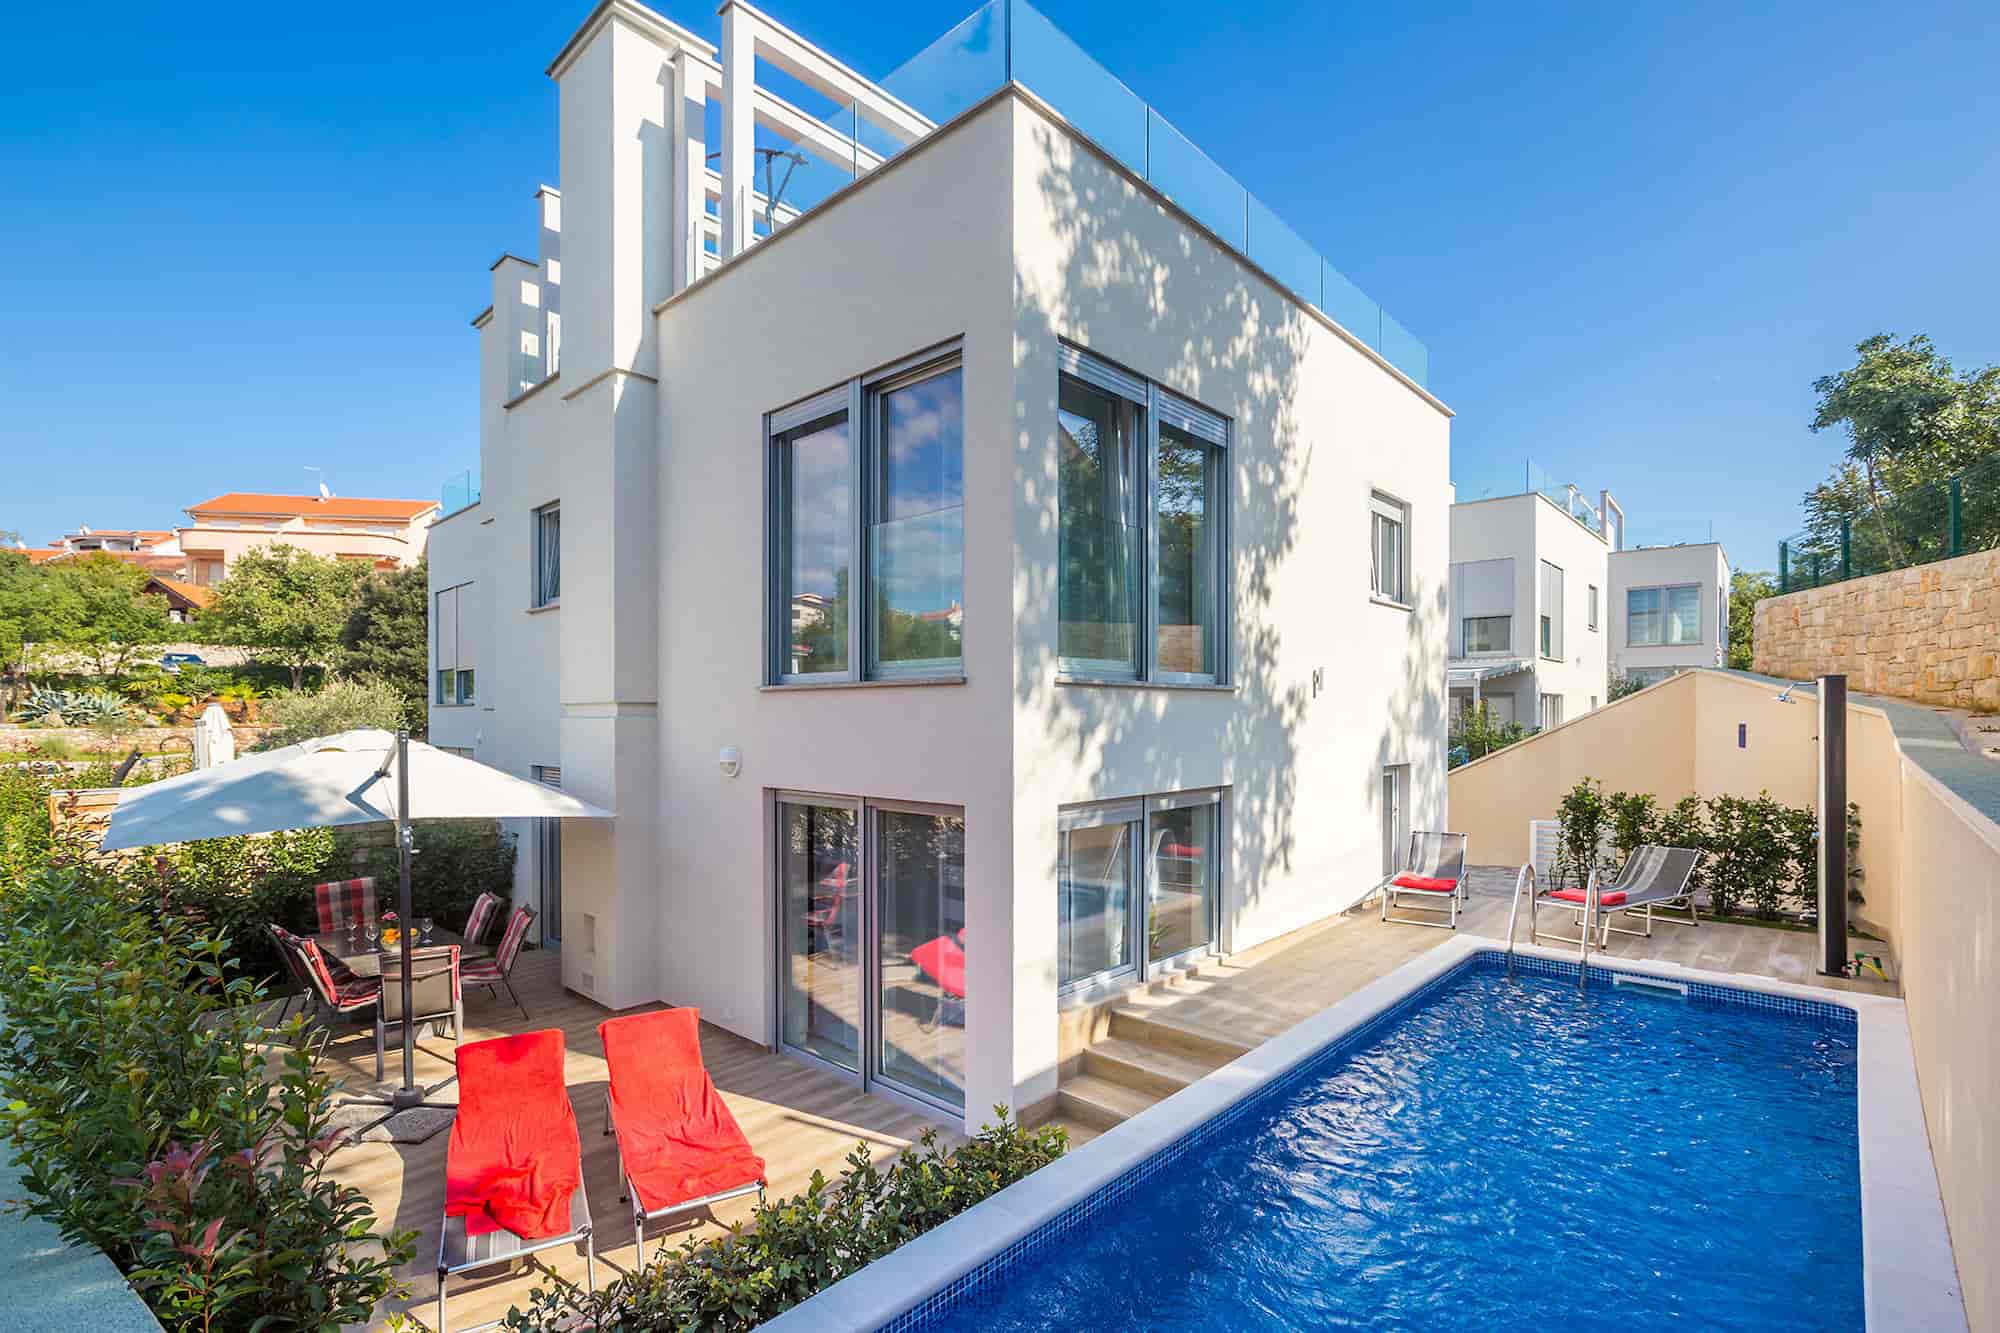 Modern villa with pool, roof terrace, 400 meters from the beach